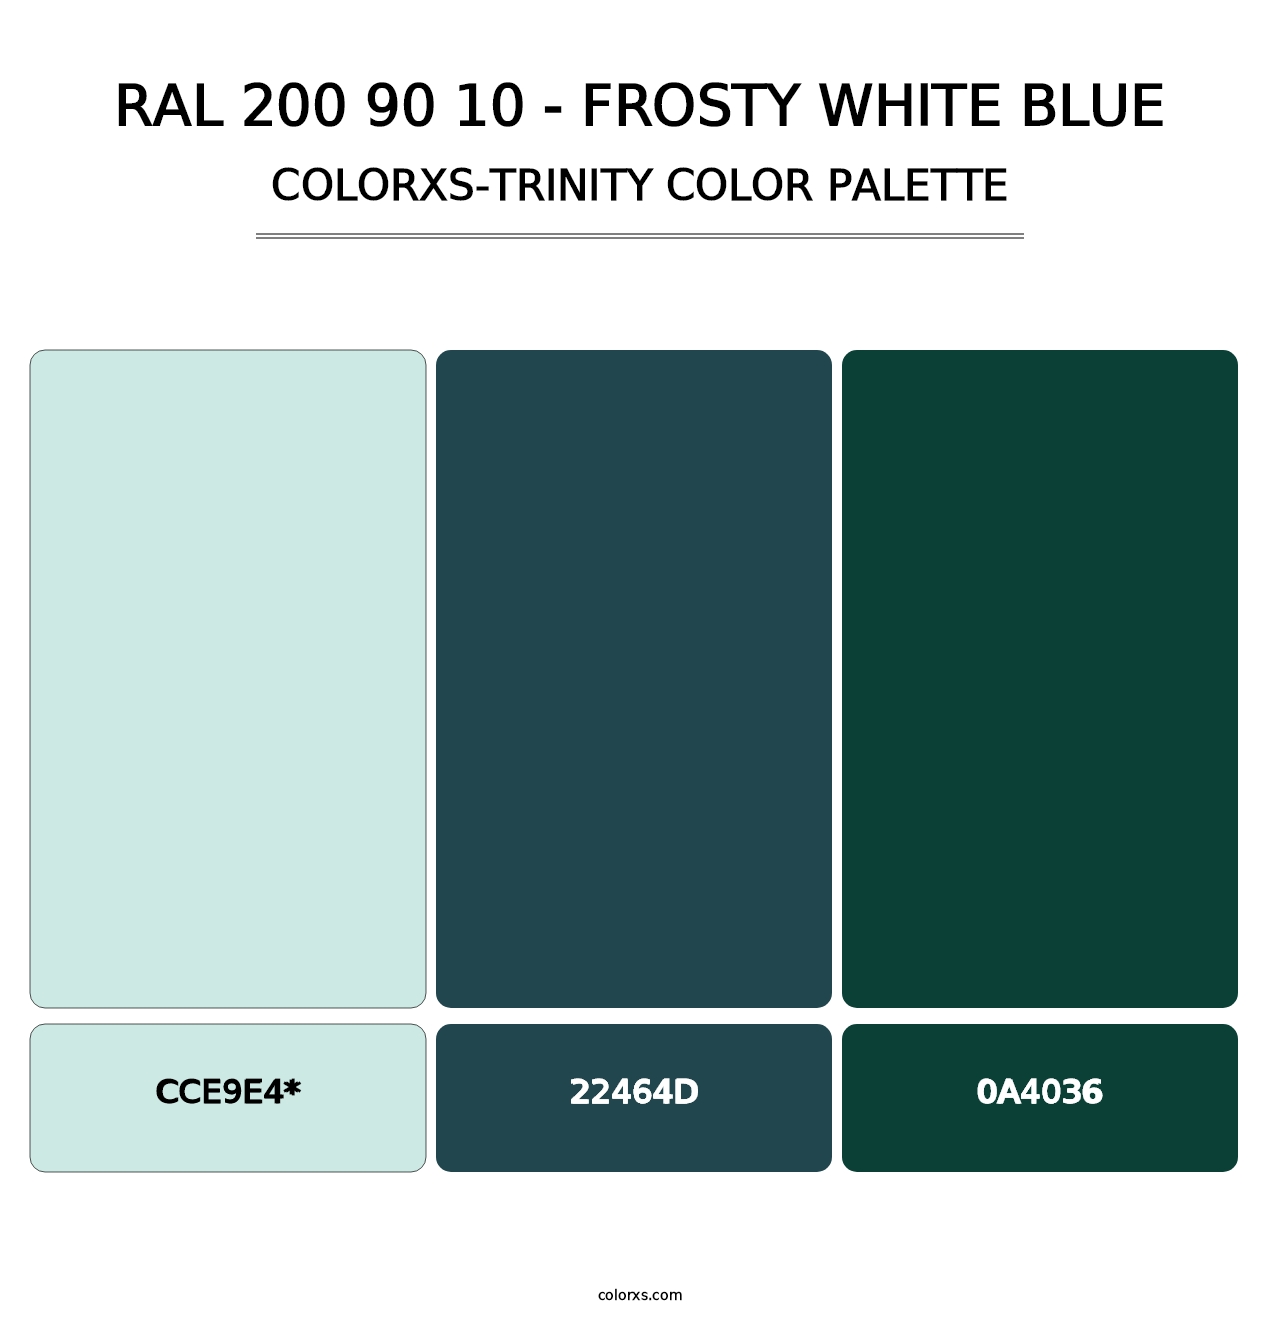 RAL 200 90 10 - Frosty White Blue - Colorxs Trinity Palette